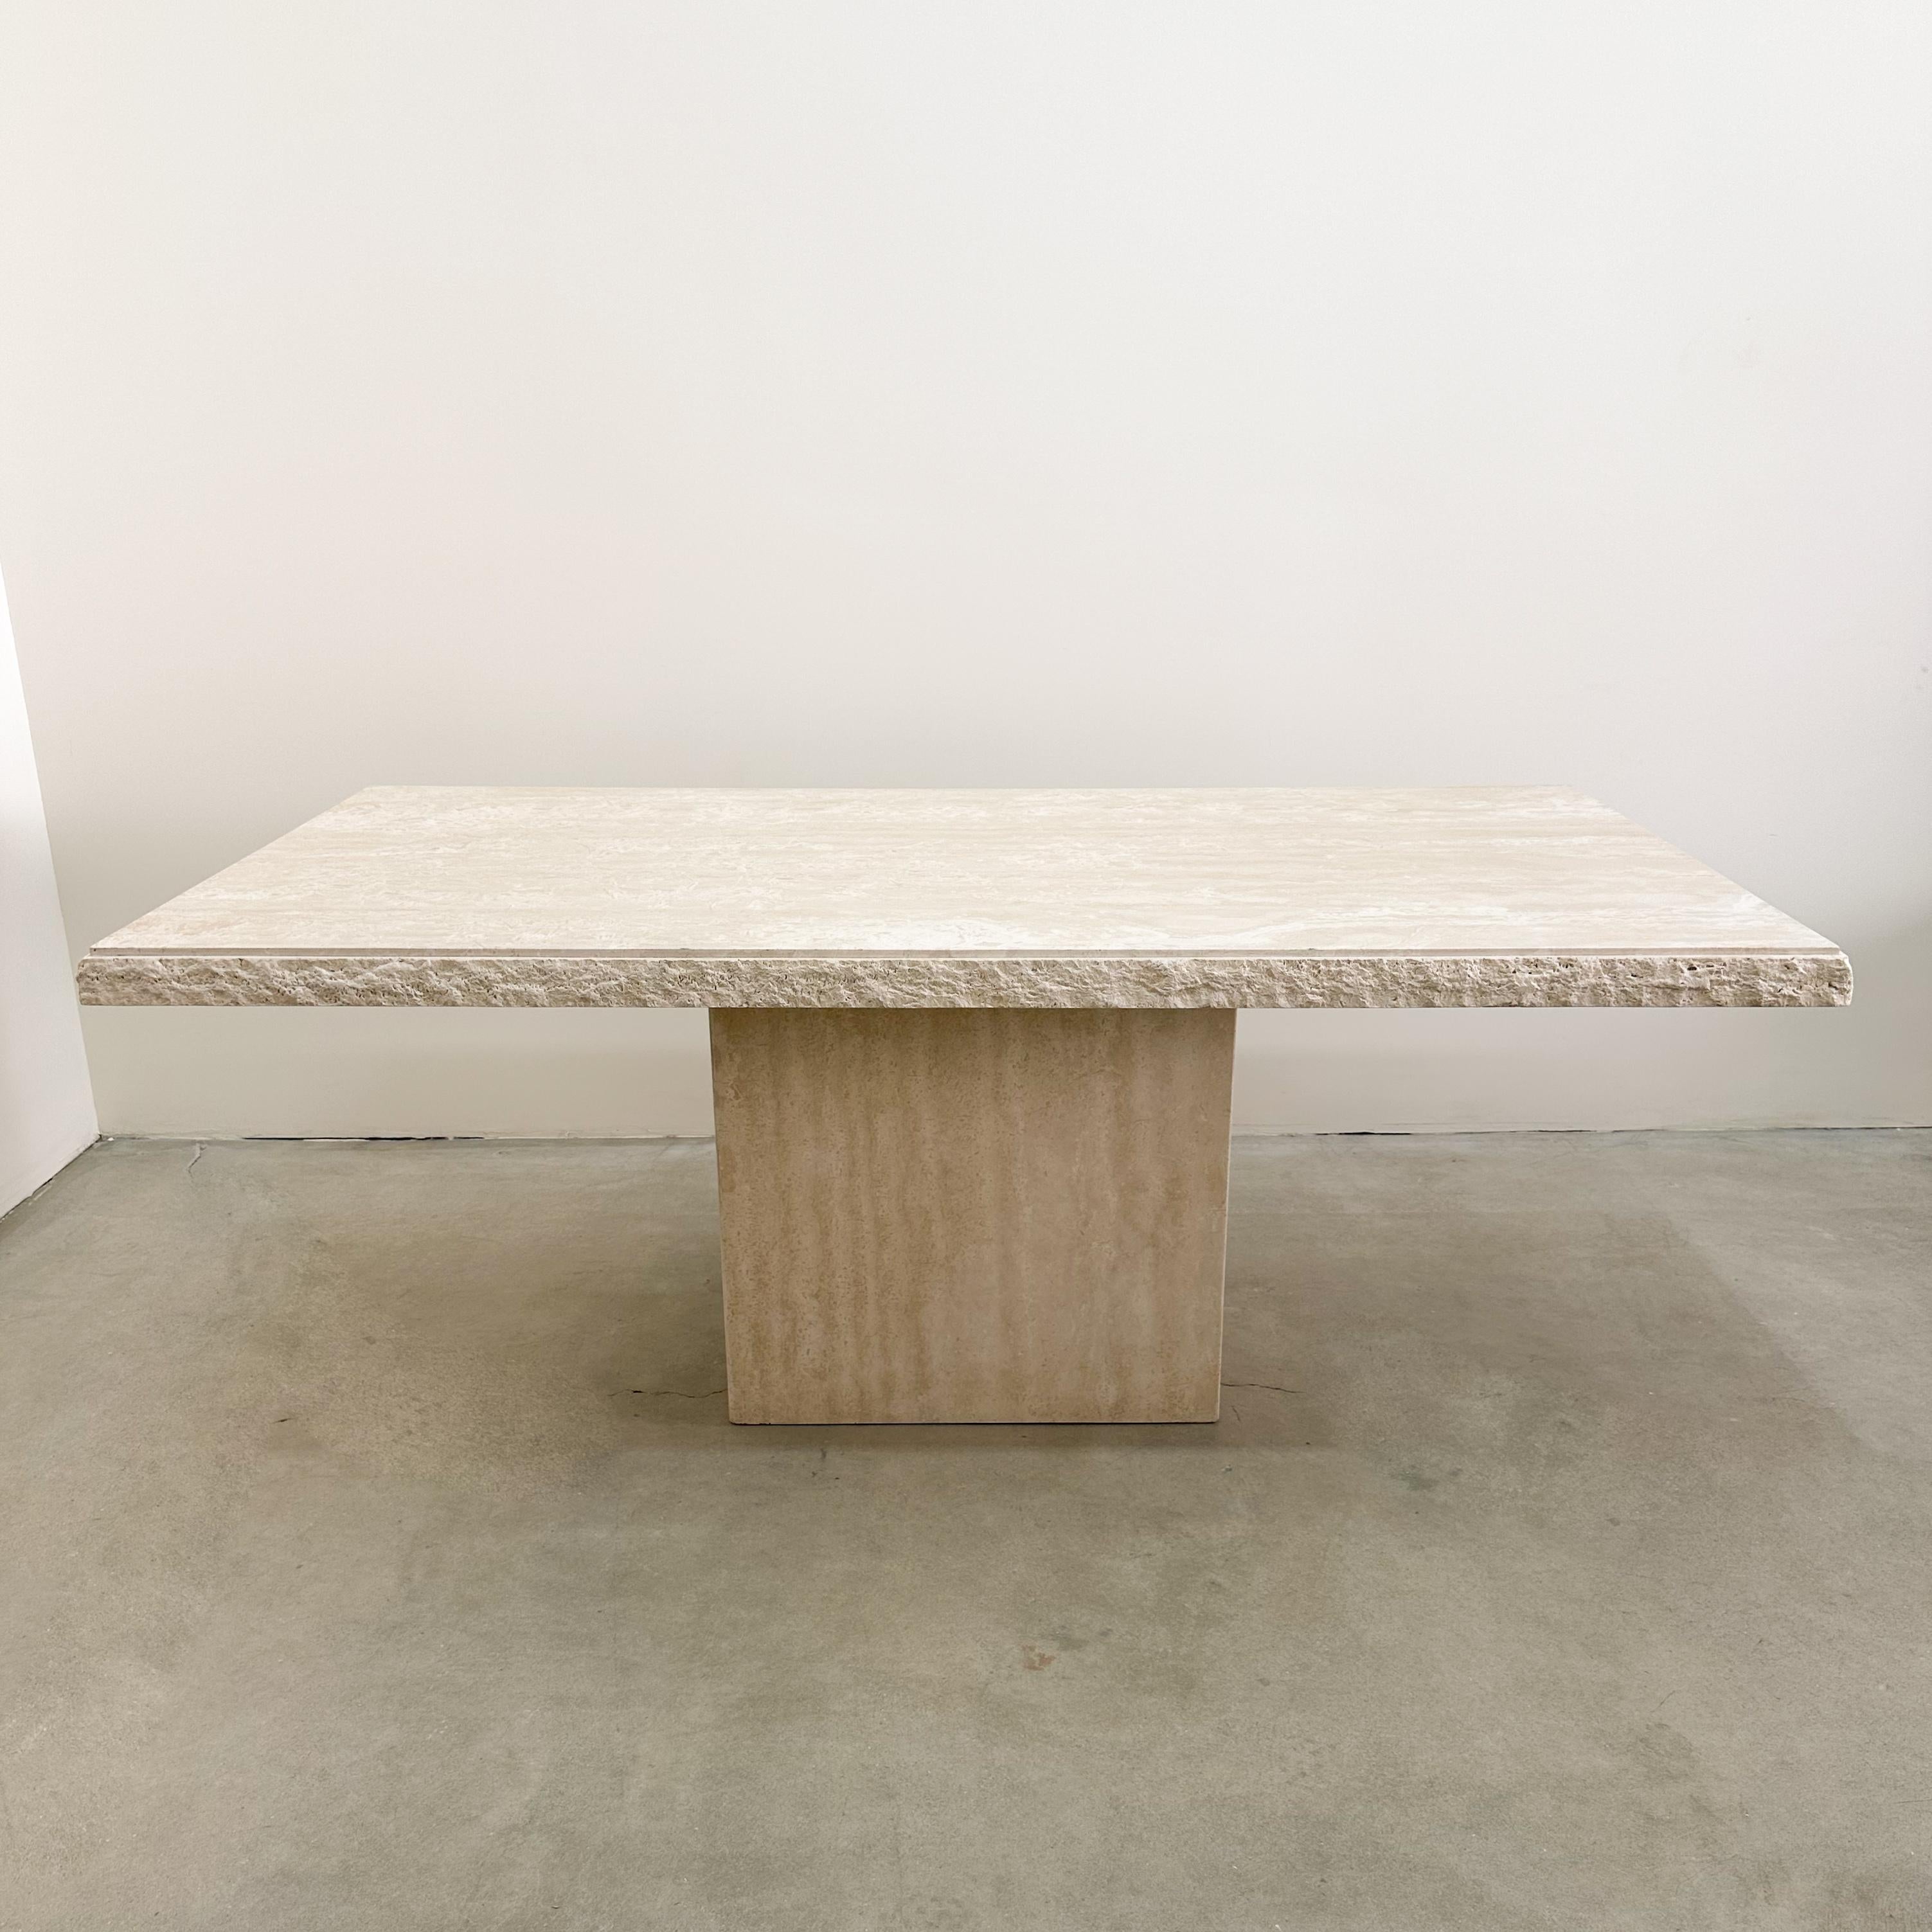 Vintage Italian Travertine Stone Rectangle Raw Edge Live Edge Dining Table In Good Condition For Sale In Palm Desert, CA